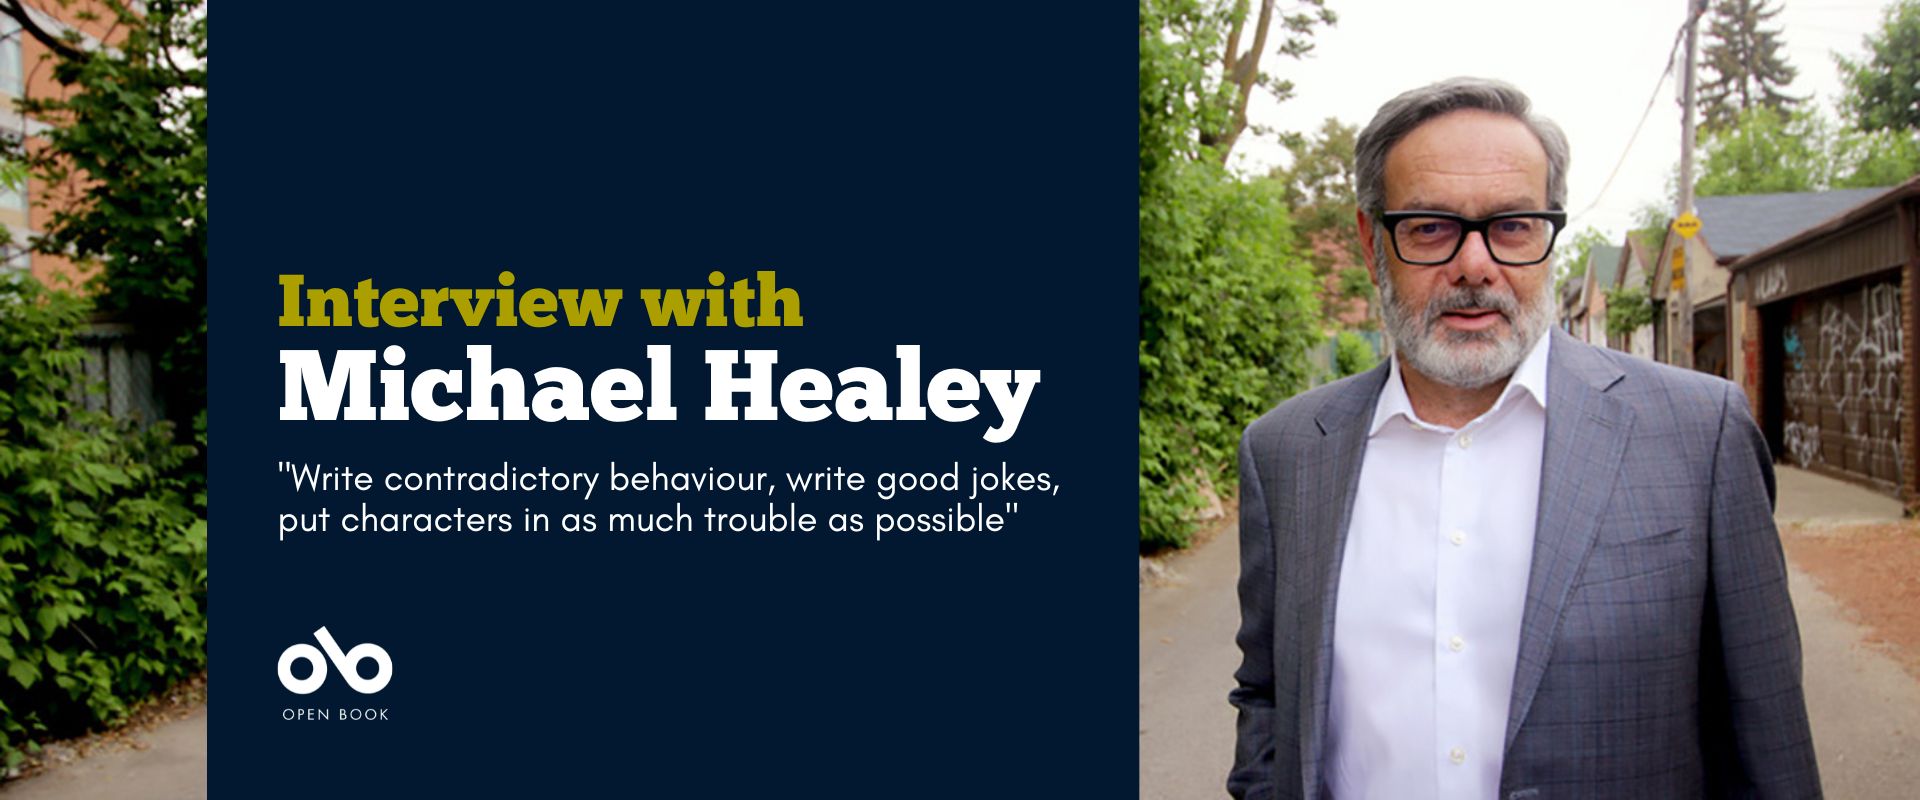 Banner image of playwright Michael Healey standing outside in a Toronto laneway. Text read interview with Michael Healey, Write contradictory behaviour, write good jokes, put characters in as much trouble as possible. Open Book logo bottom left